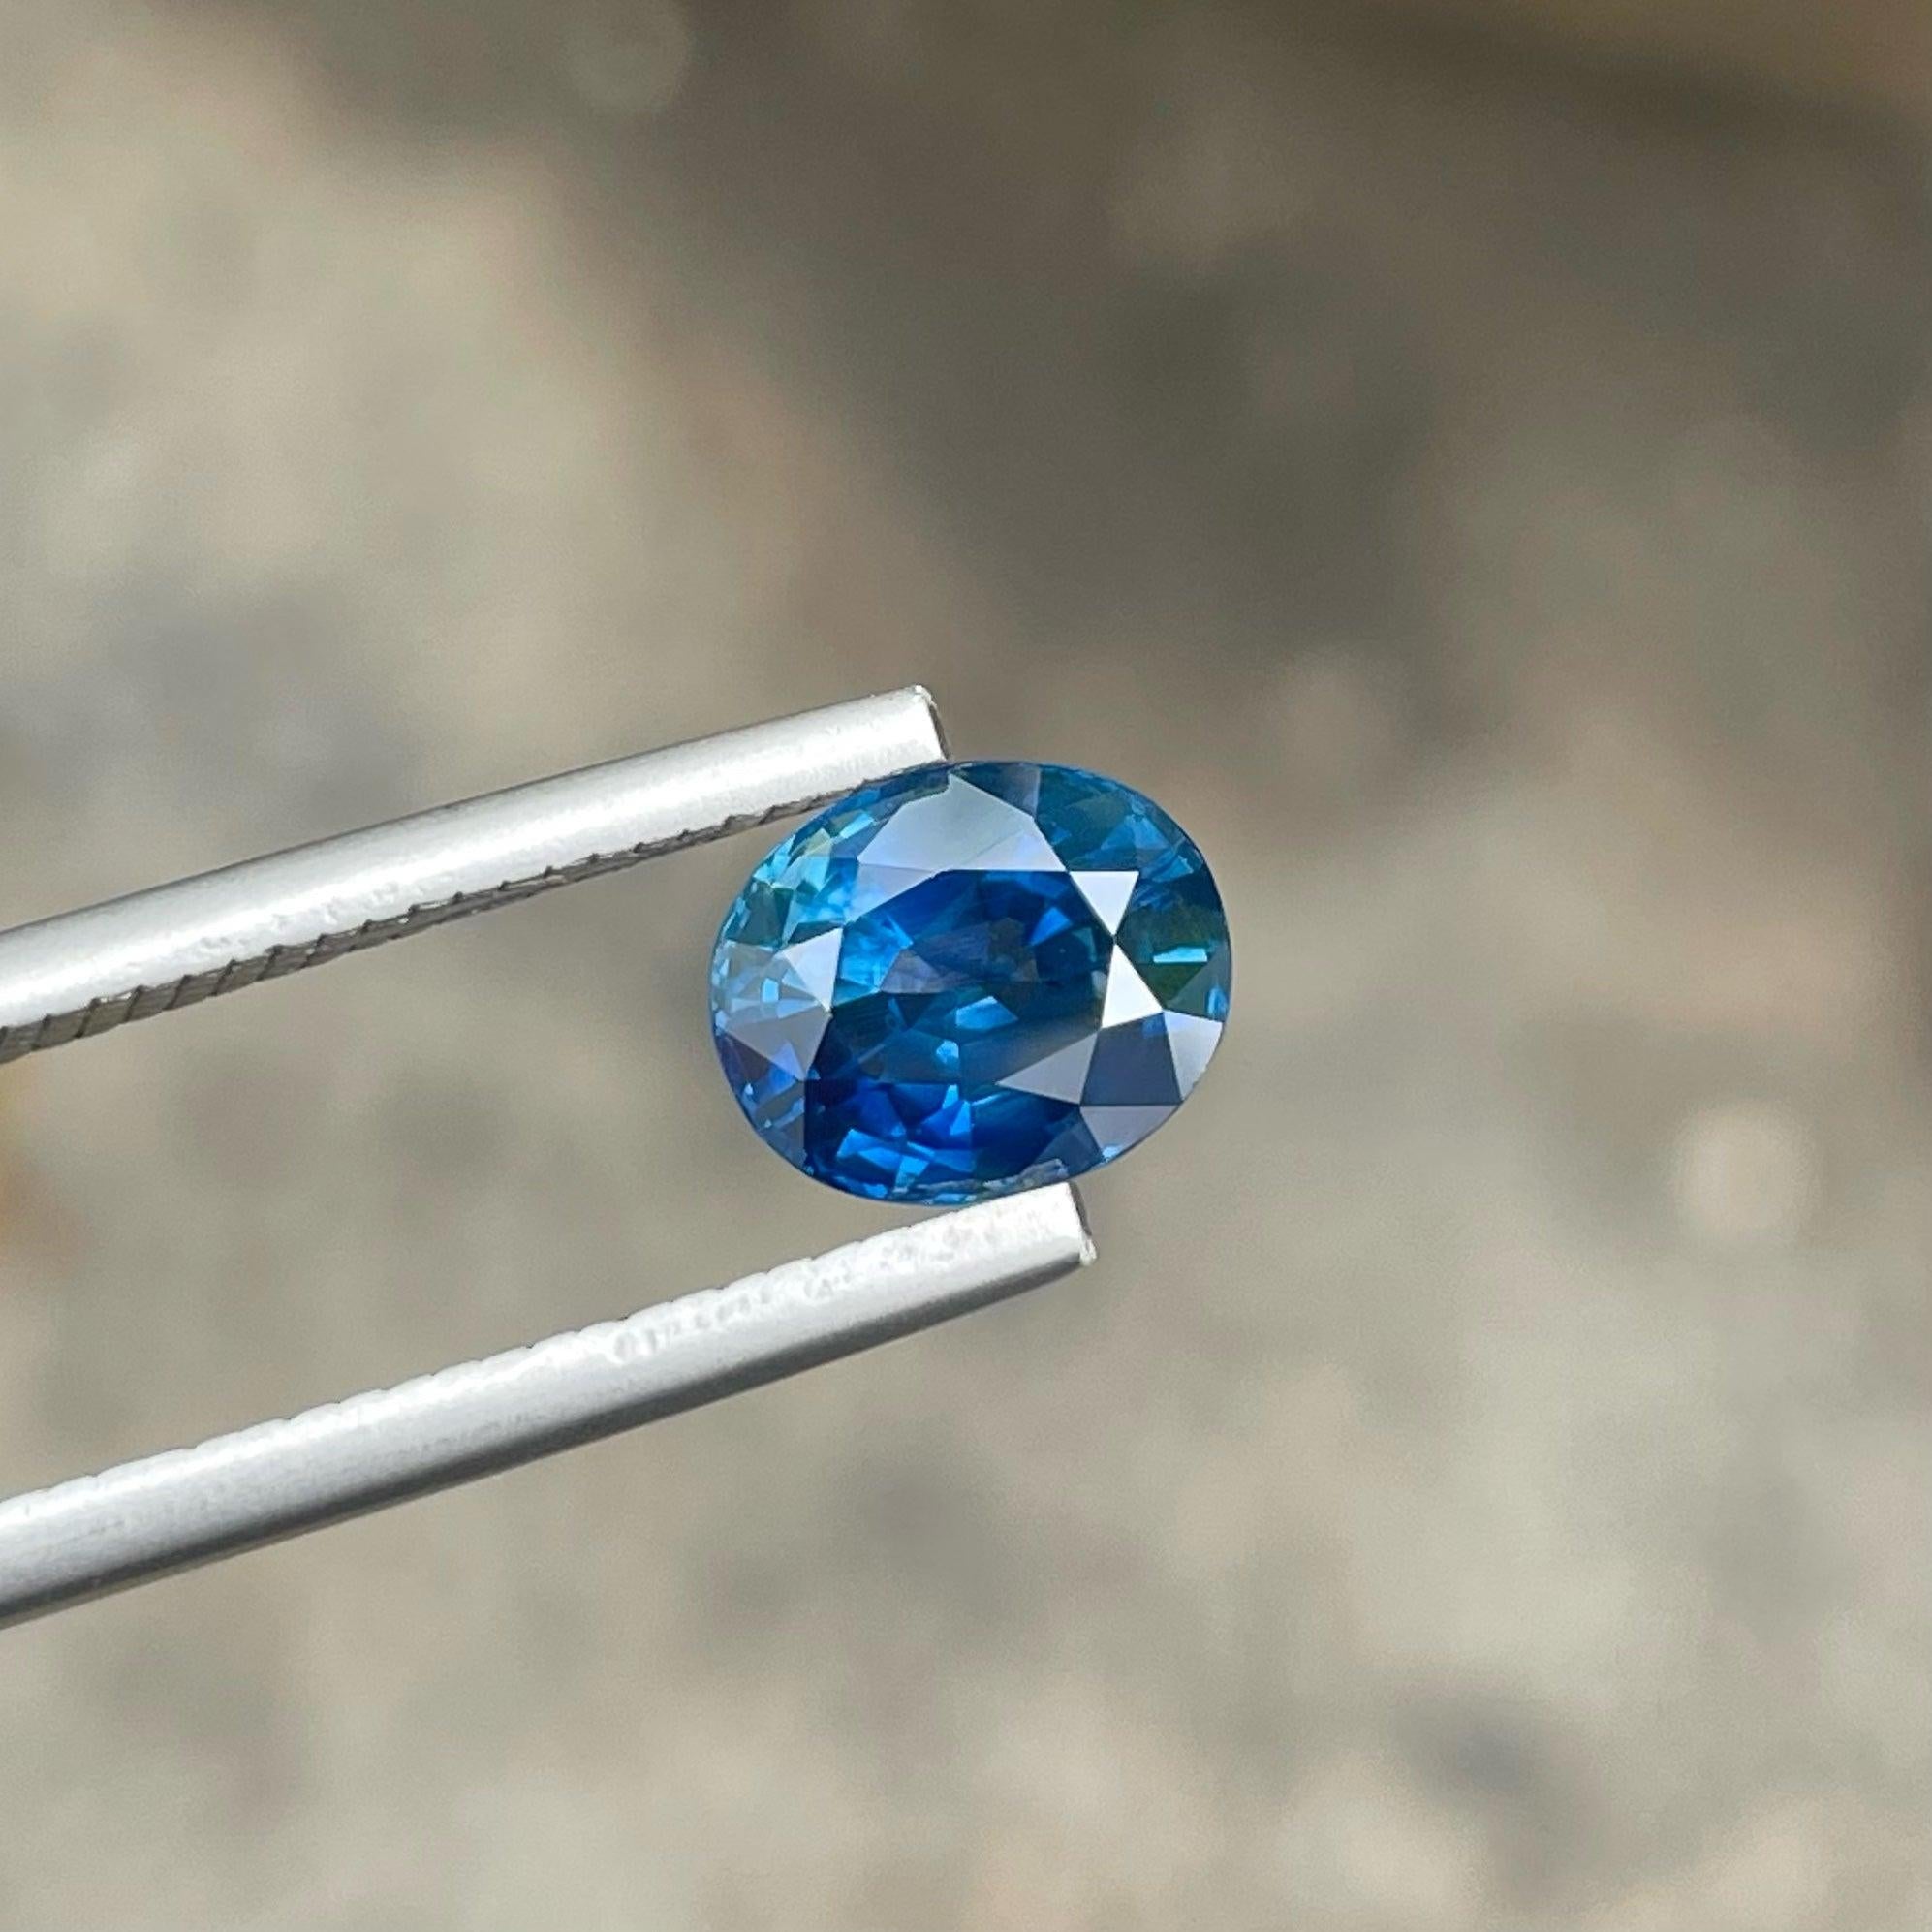 Fabulous Natural Ceylon Sapphire Gemstone of 2.25 carats from Srilanka has a wonderful cut in a Oval shape, incredible Blue color, Great brilliance. This gem is totally VVS Clarity.

Product Information:
GEMSTONE TYPE:	Fabulous Natural Ceylon